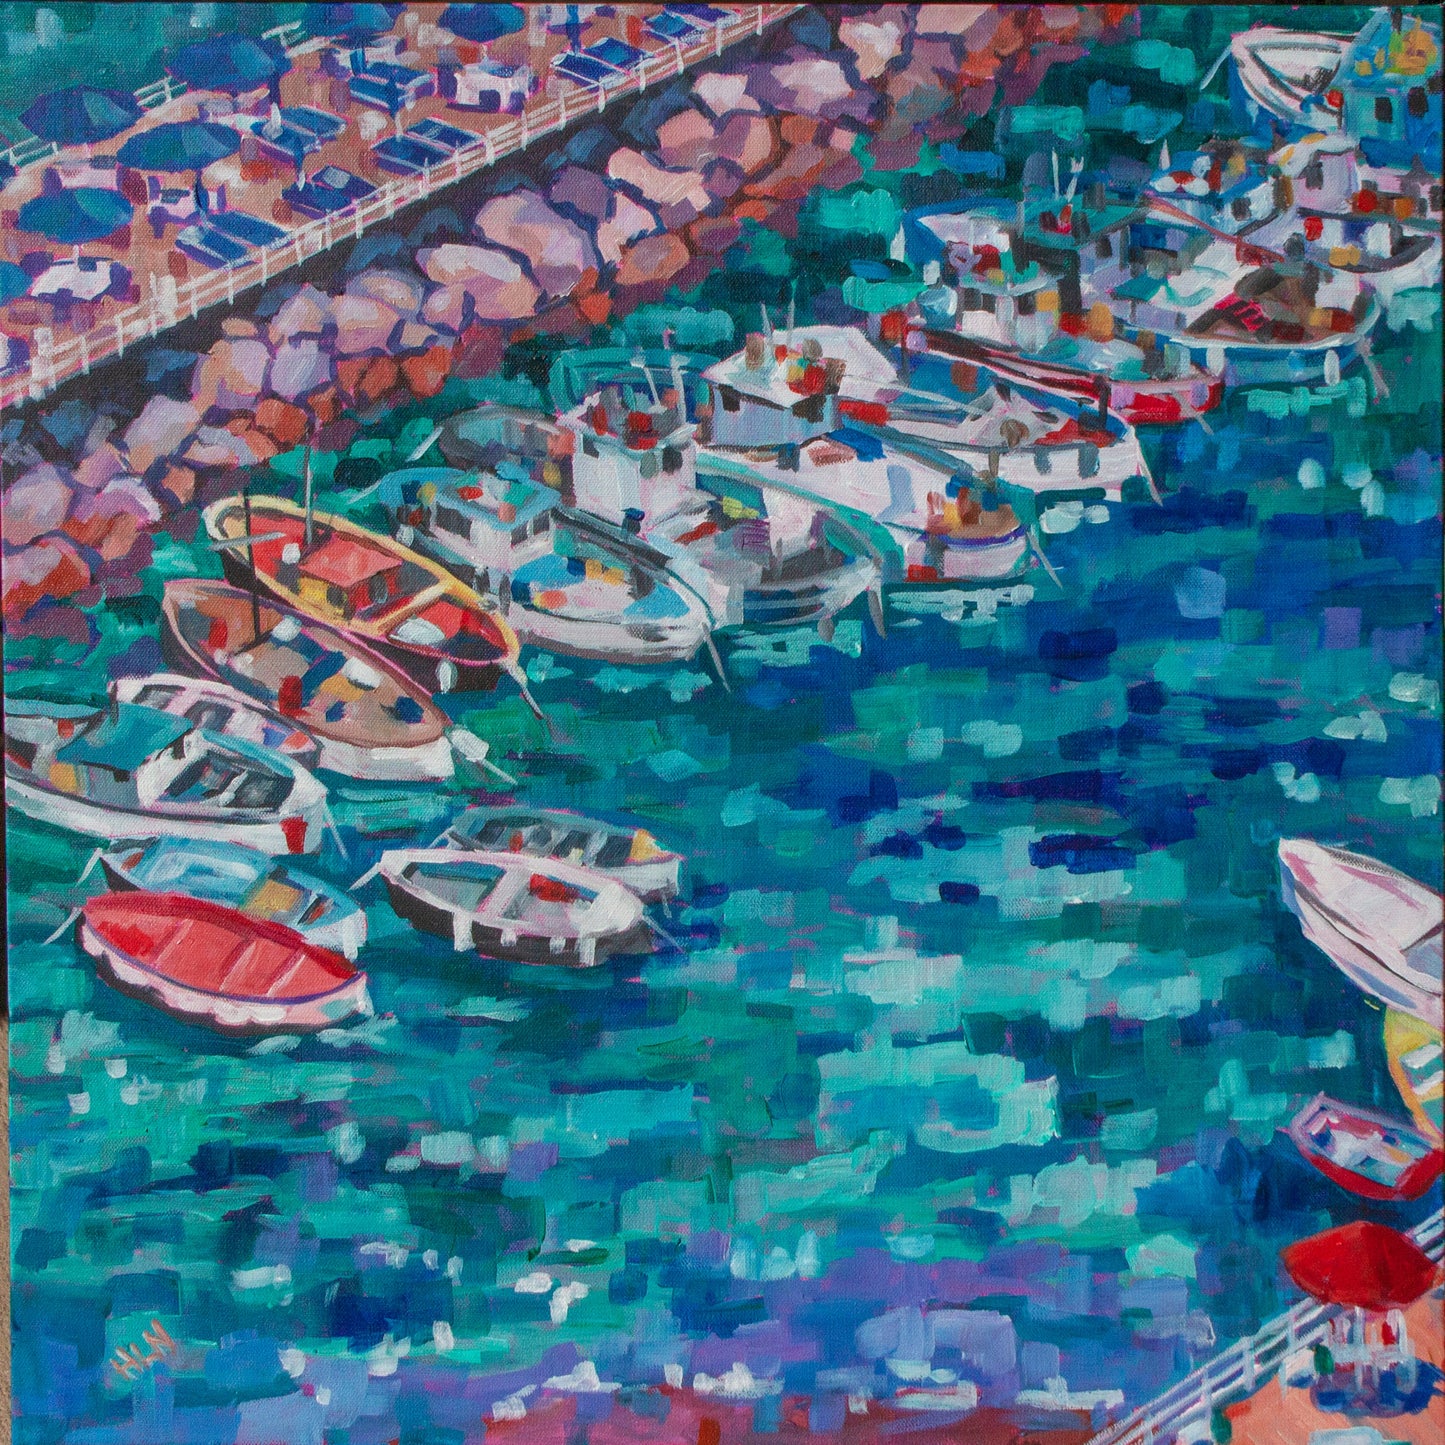 colorful fishing boats lining the pier with impressionistic brush strokes for the water in Sorrento Harbor on the Amalfi coast of Italy